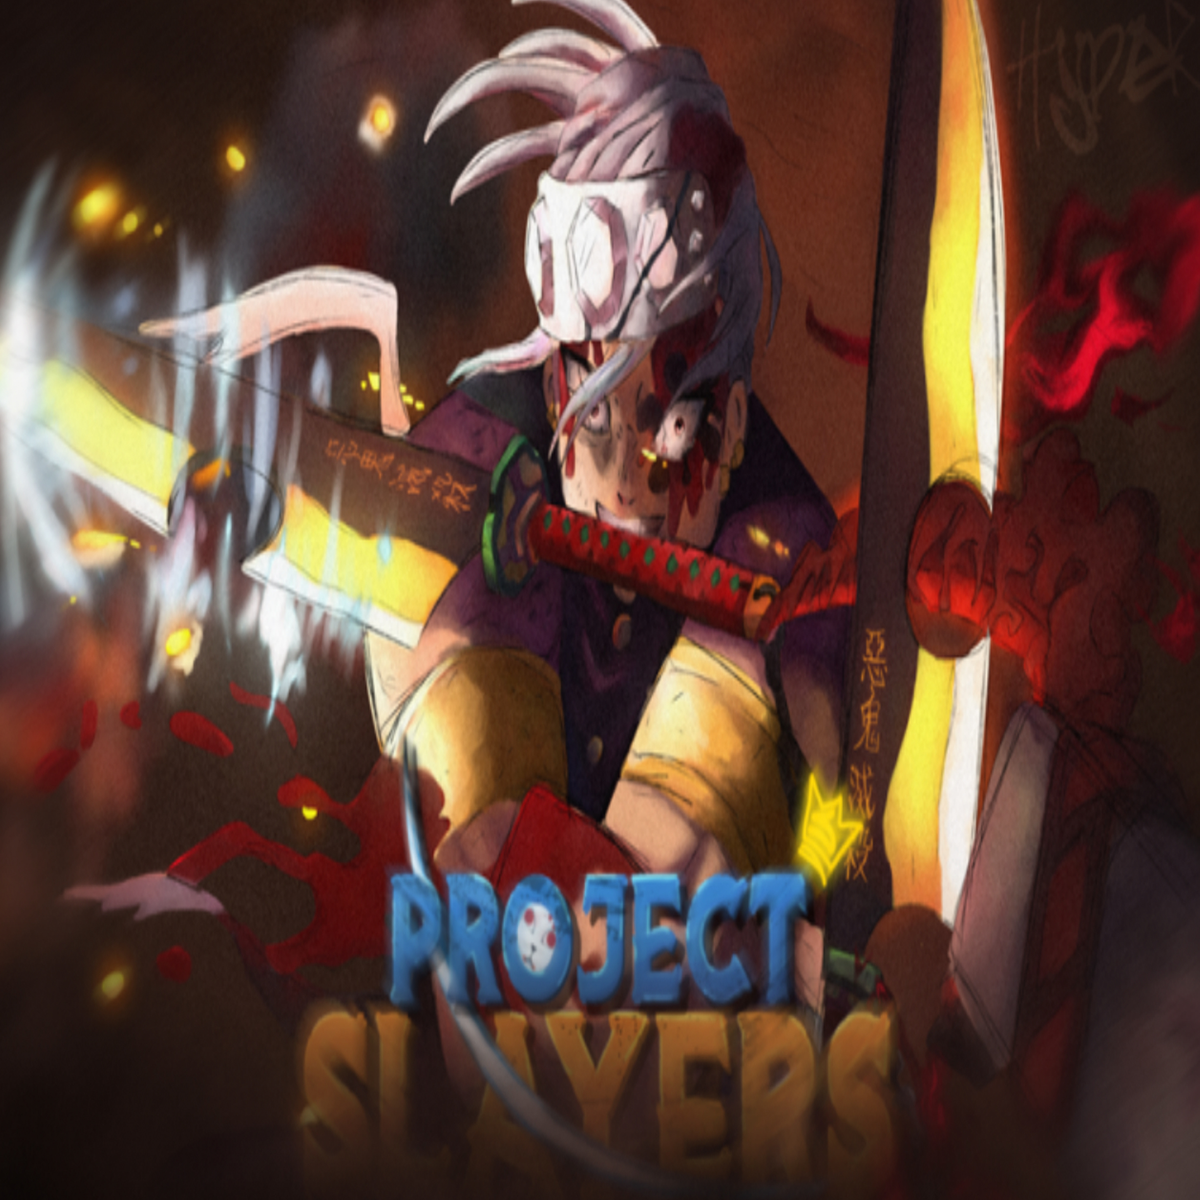 🎁HURRY UP🎁CODES FOR PROJECT SLAYERS IN 2023